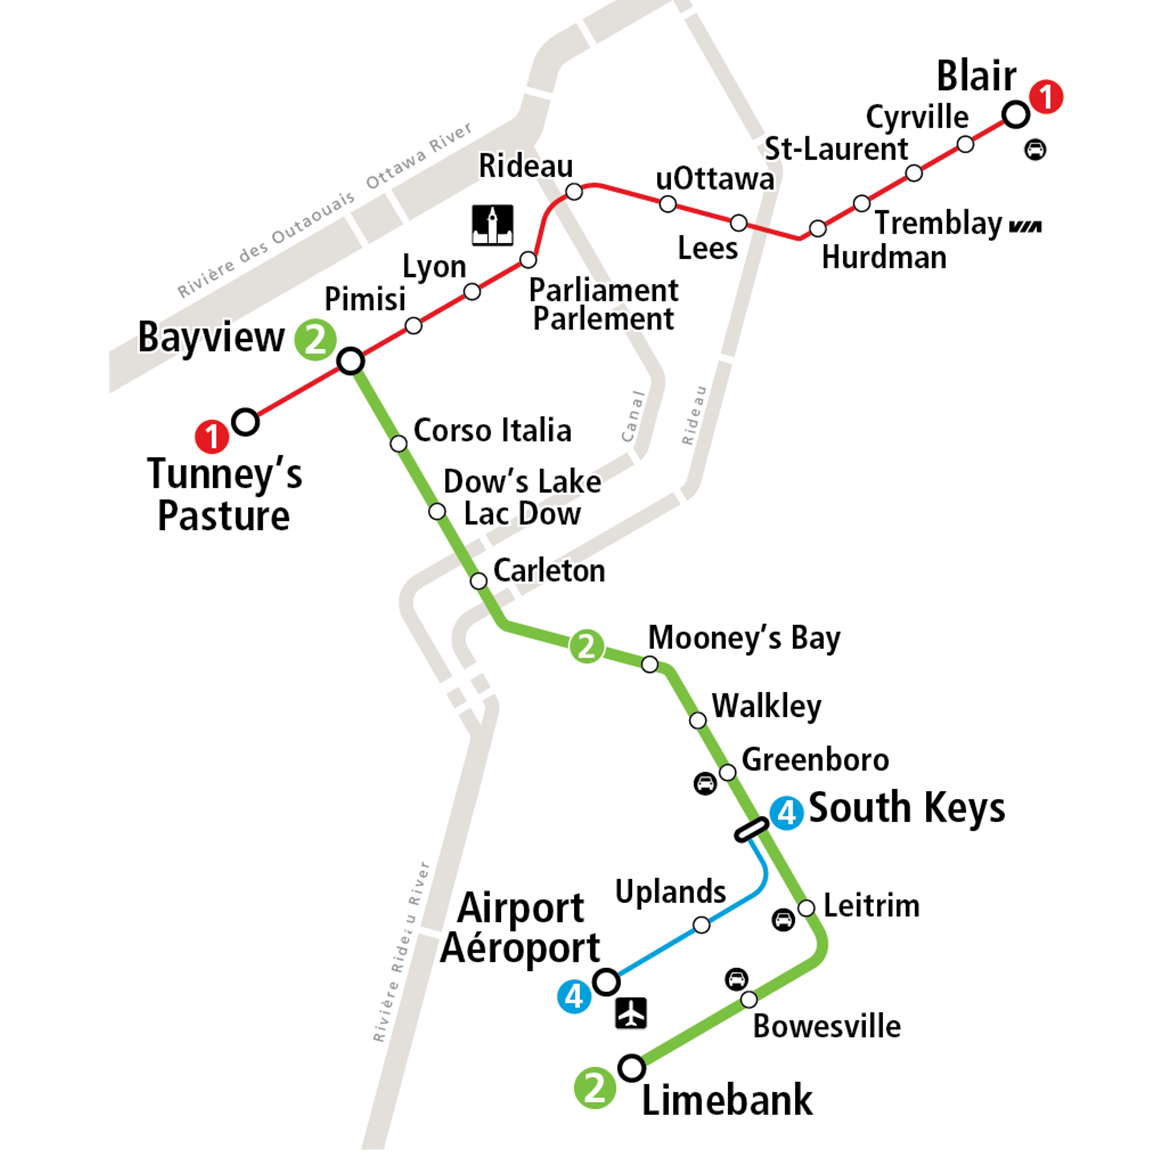 A visual representation of Line 2 route map, illustrating the journey from Bayview to Limebank station